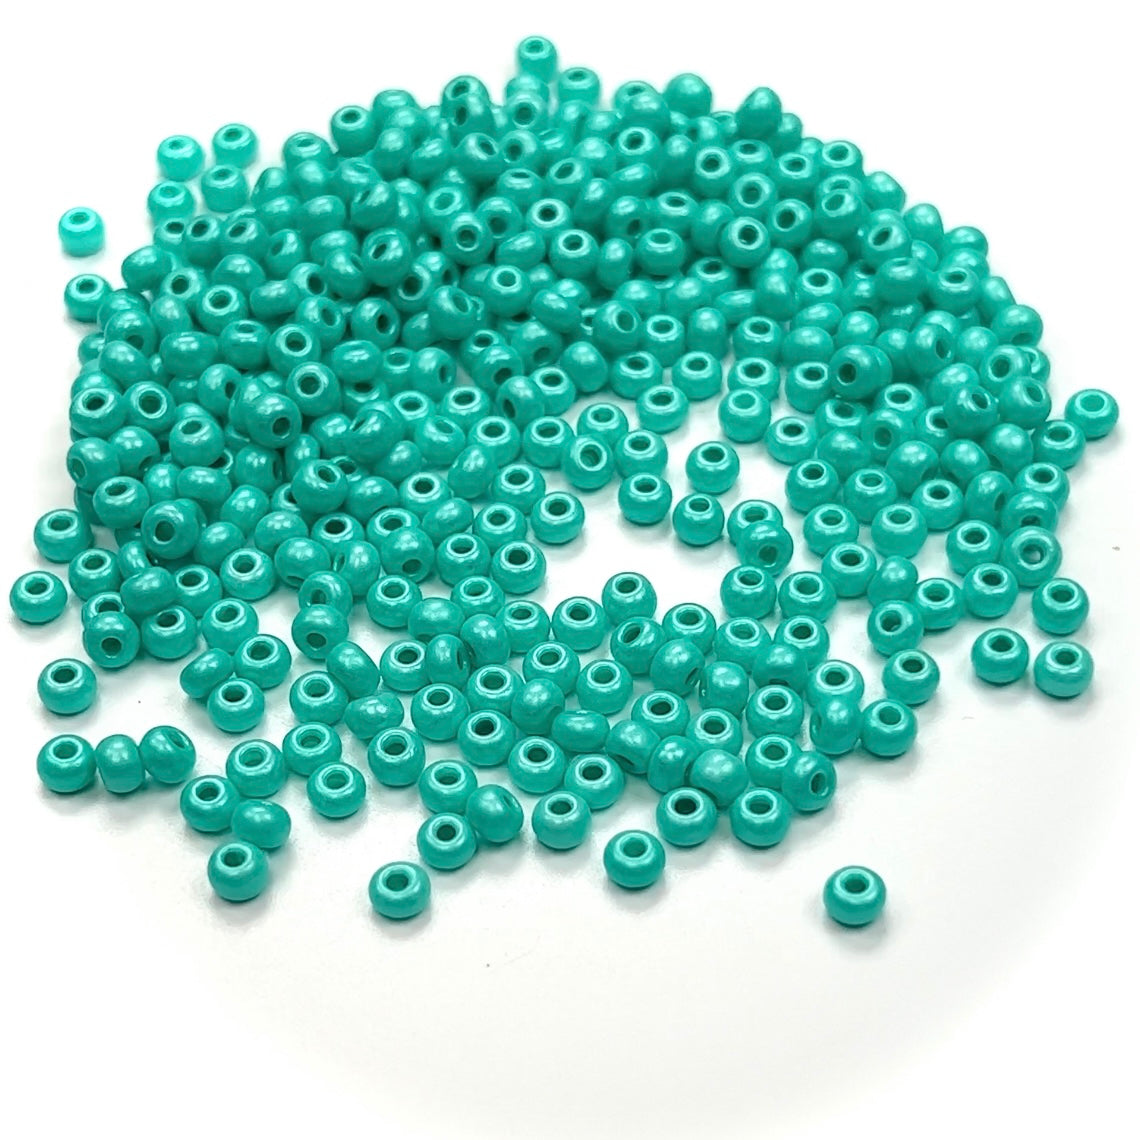 Rocailles size 6/0 (4mm) Green Dyed, Preciosa Ornela Traditional Czech Glass Seed Beads, 30grams (1 oz), P953